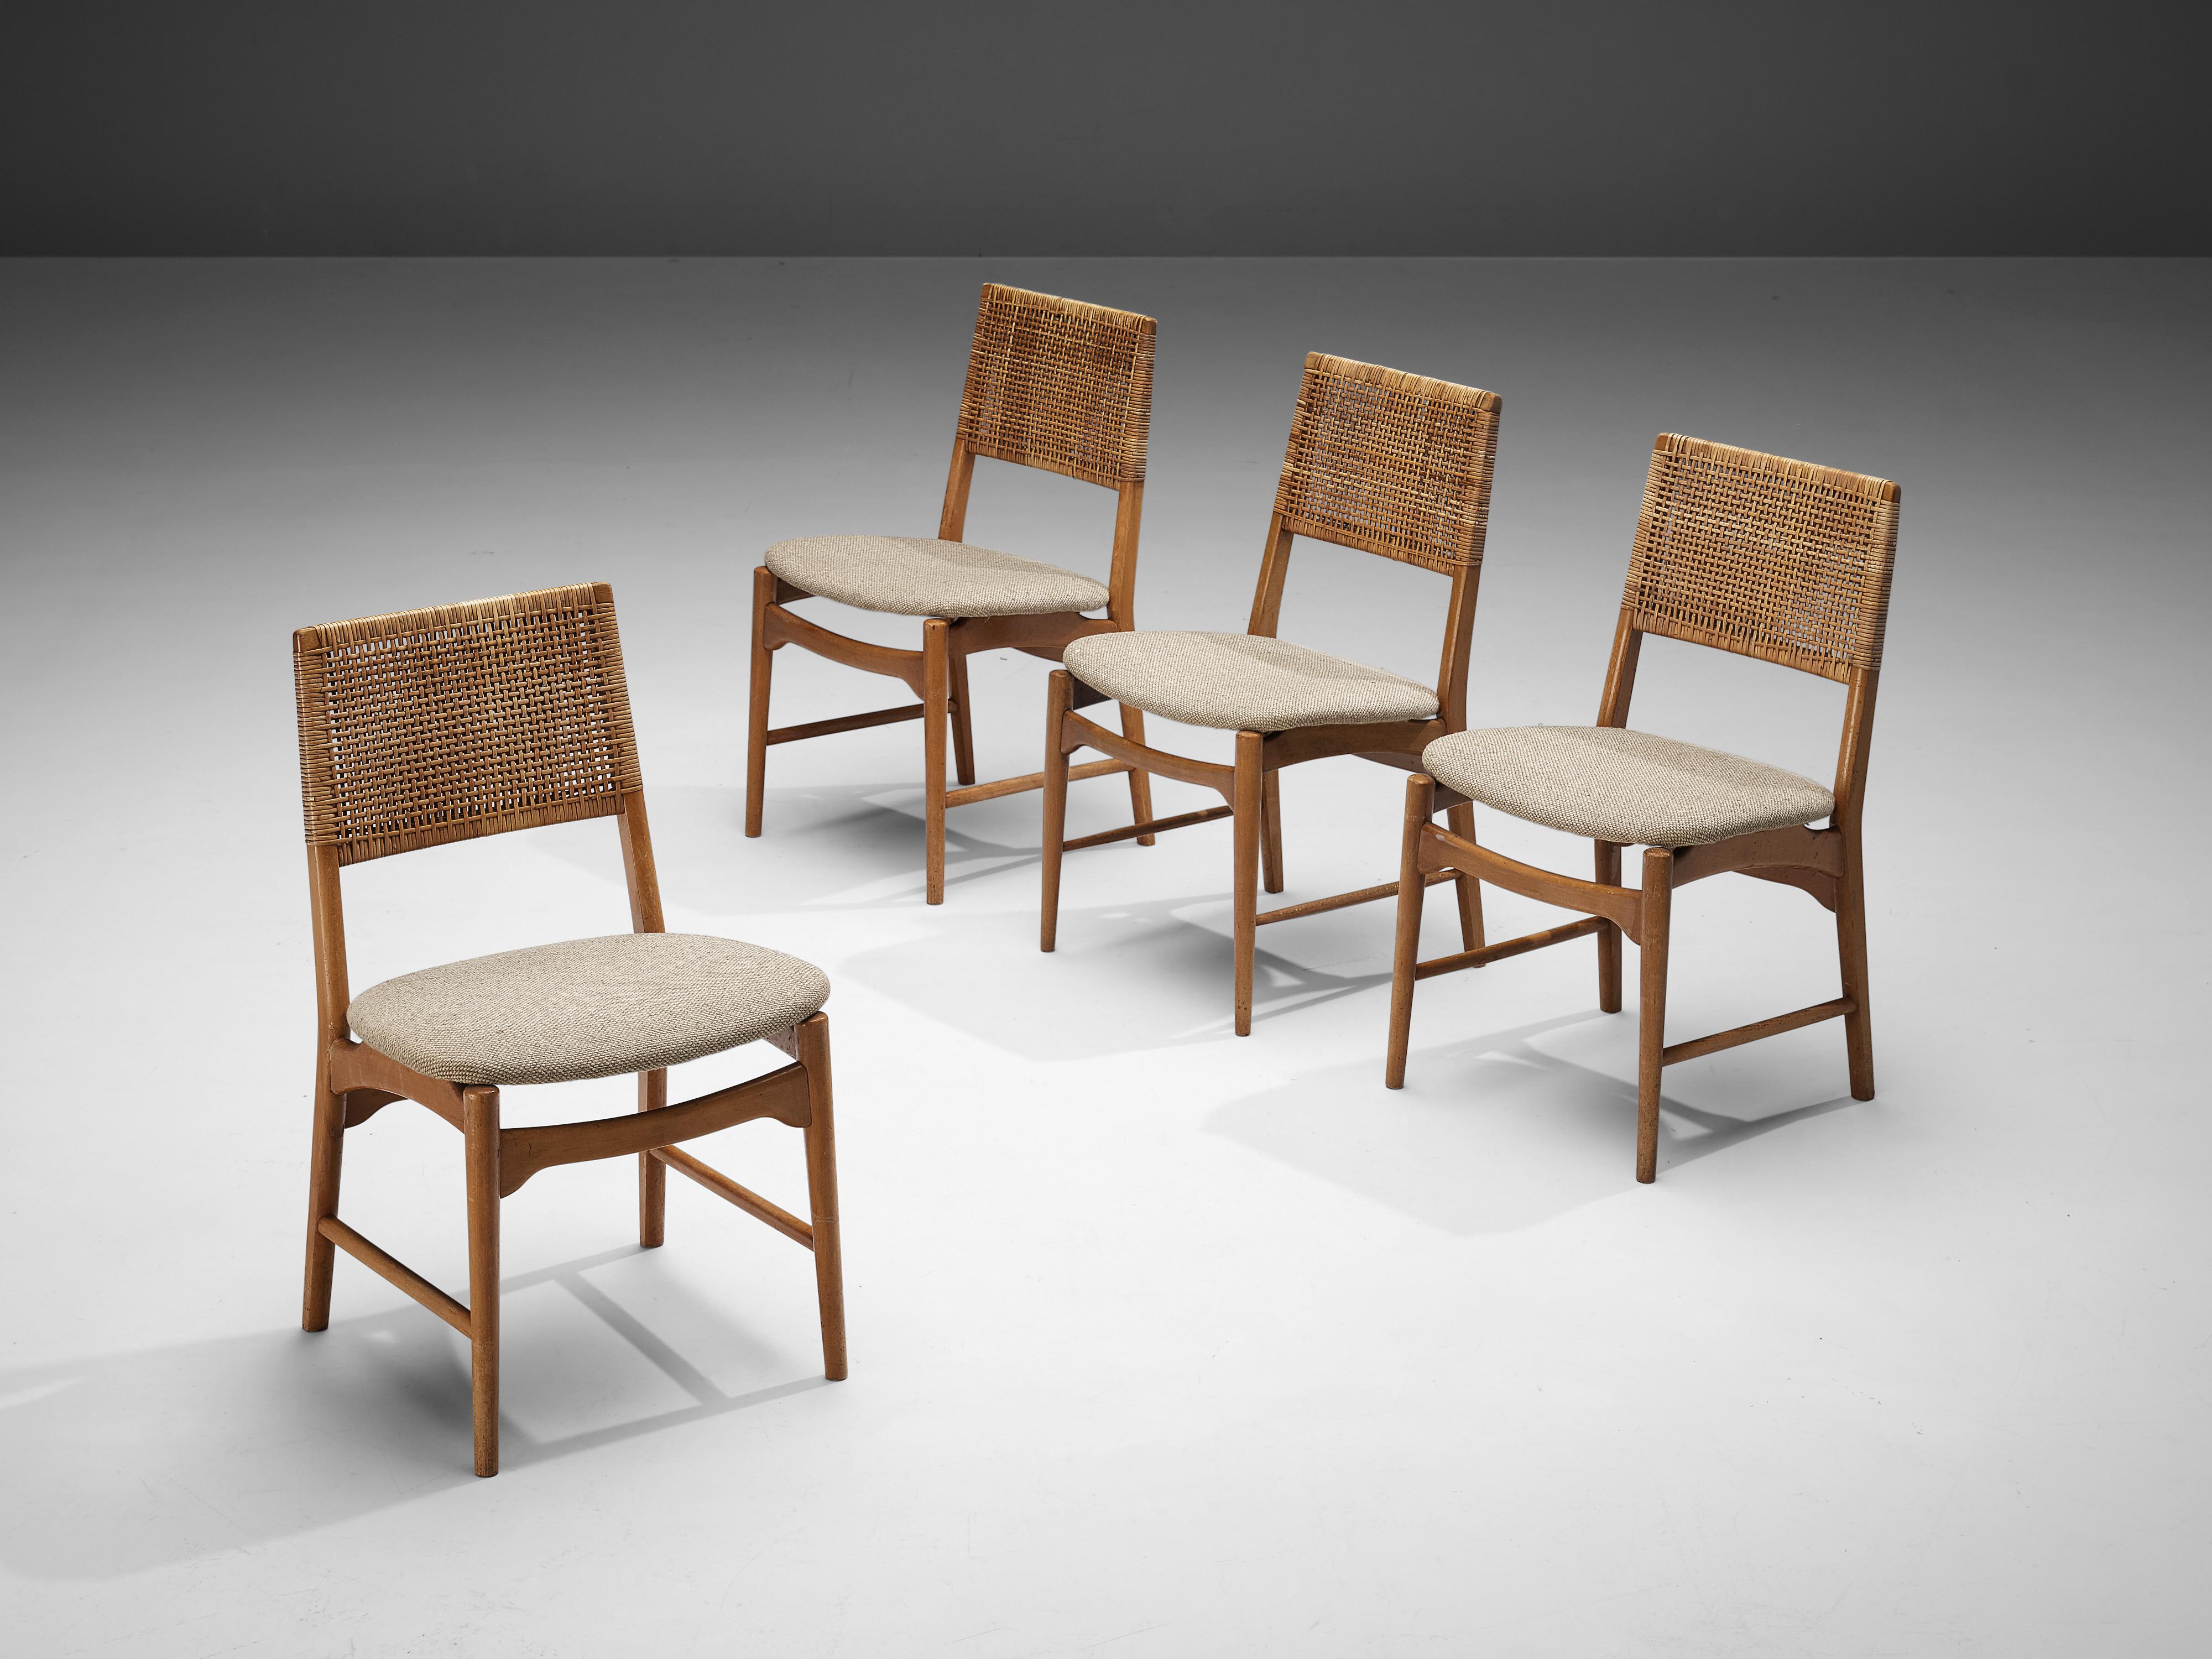 Set of four dining chairs, beech, natural fibre, fabric, Denmark, 1950s 

Elegant set of four dining chairs in solid beech and natrual fibre. This chair shows the characteristic Danish design. The tapered legs and sculptural legs, give it an open